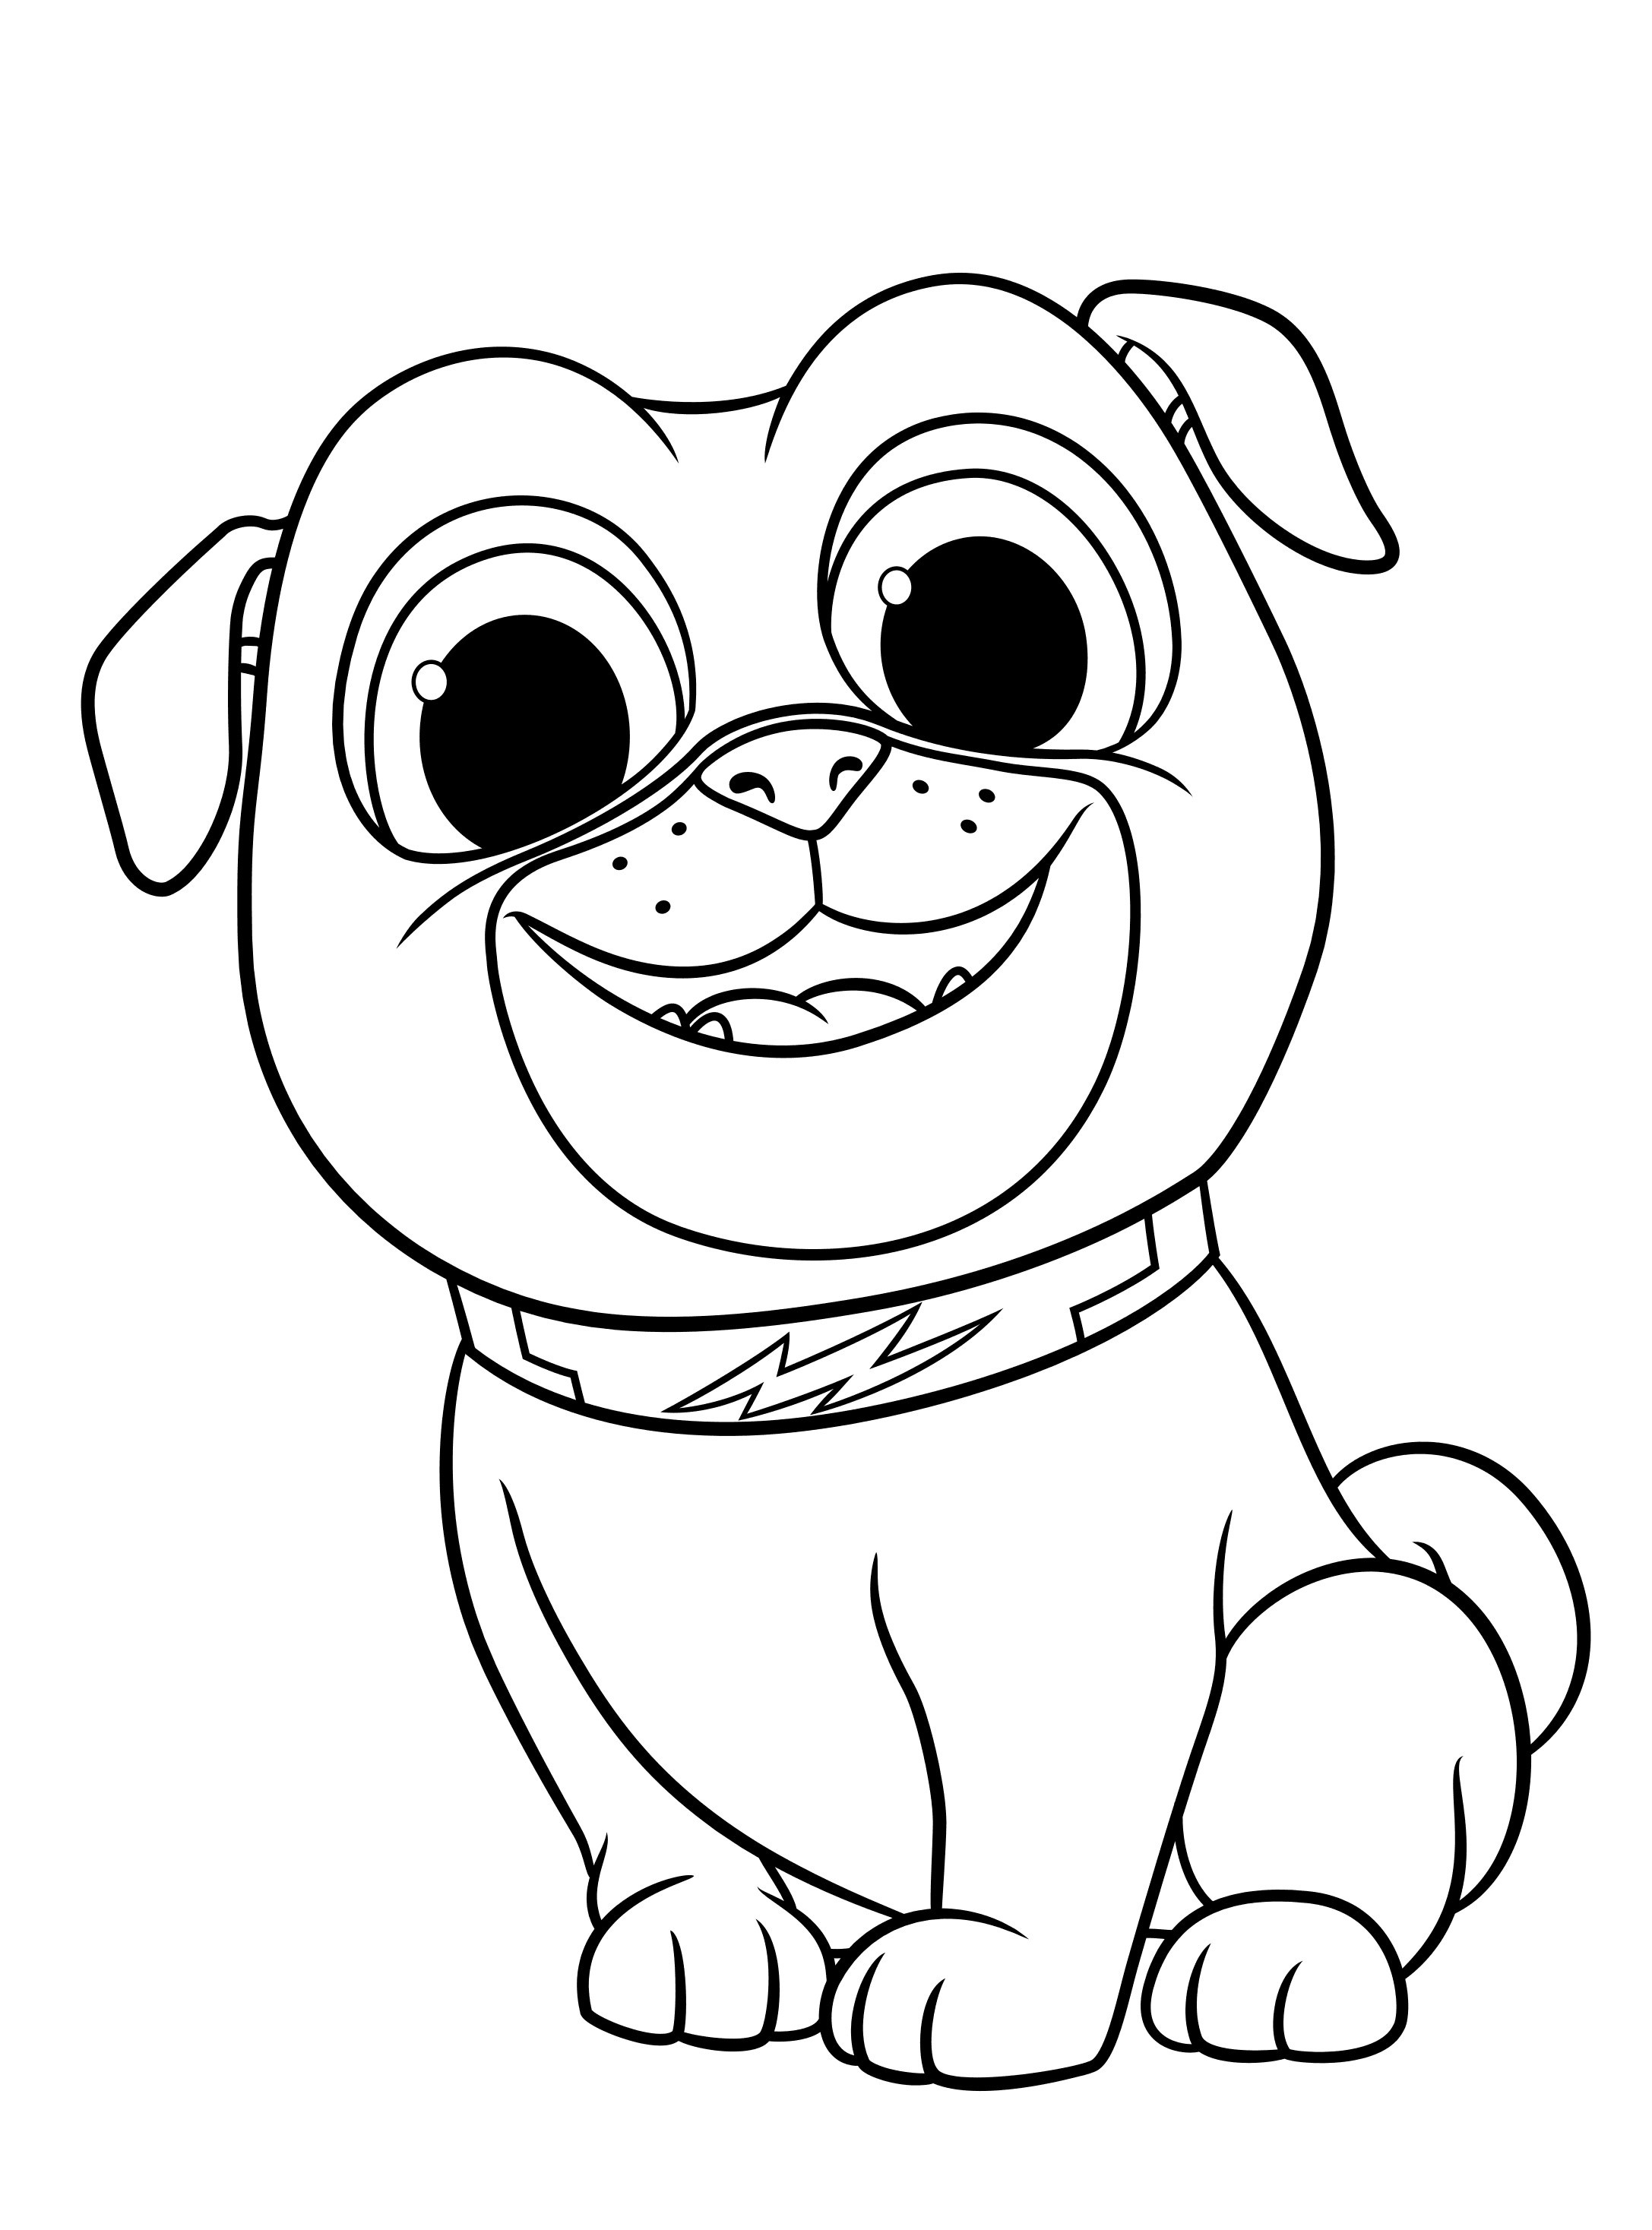 Puppy Clifford Coloring Pages at GetColorings.com | Free printable ...